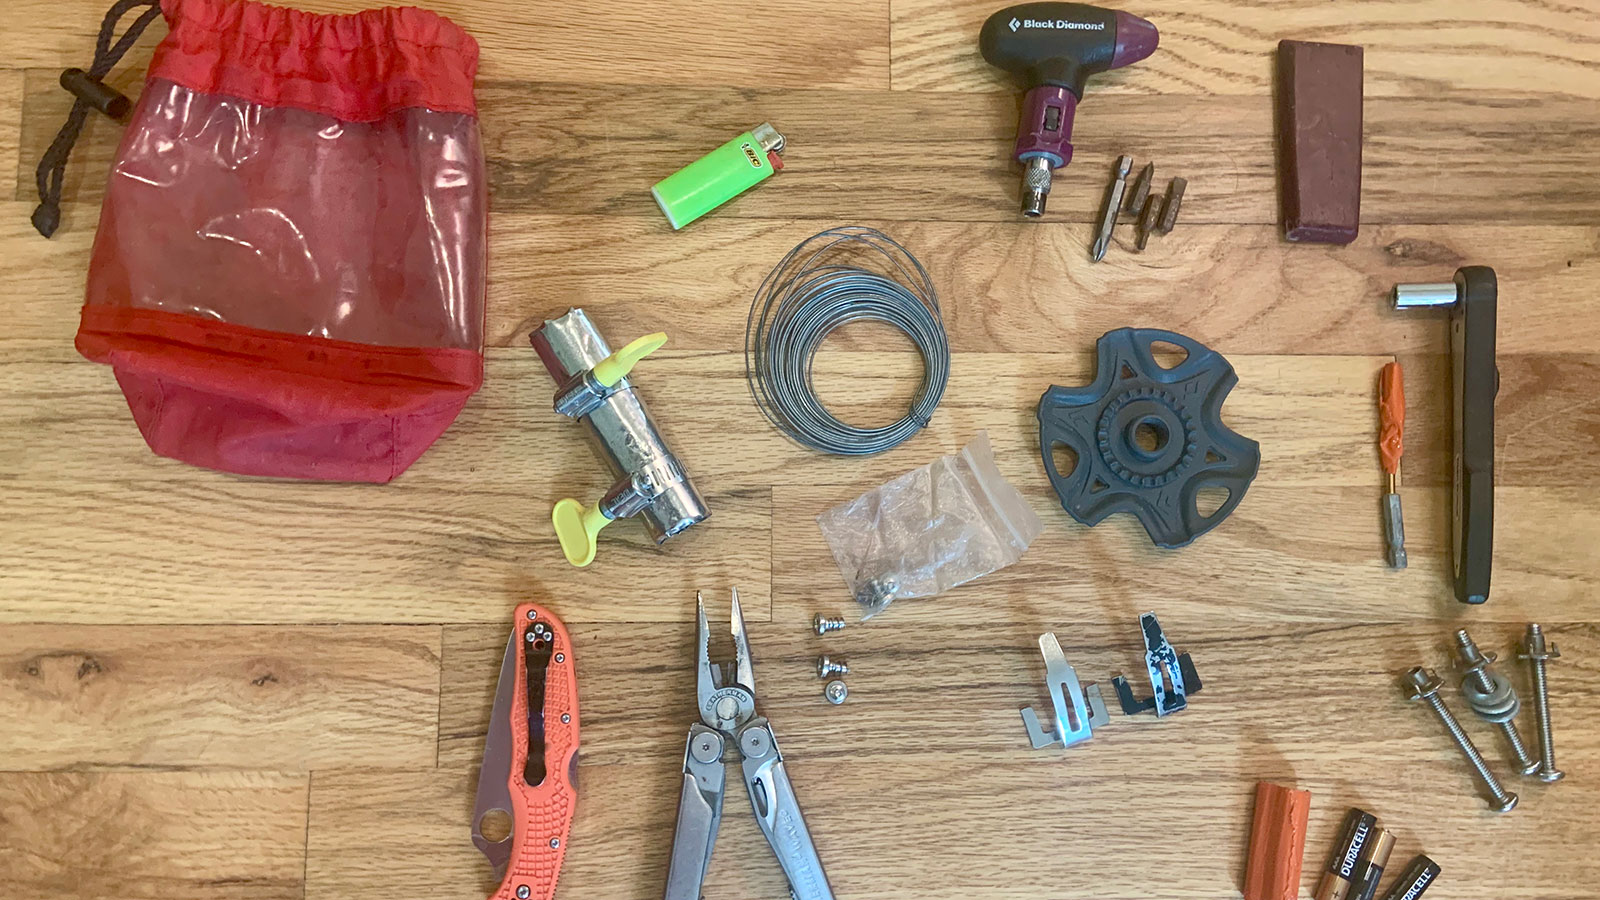 Repair Kits for Backcountry Skiing - Baker Mountain Guides